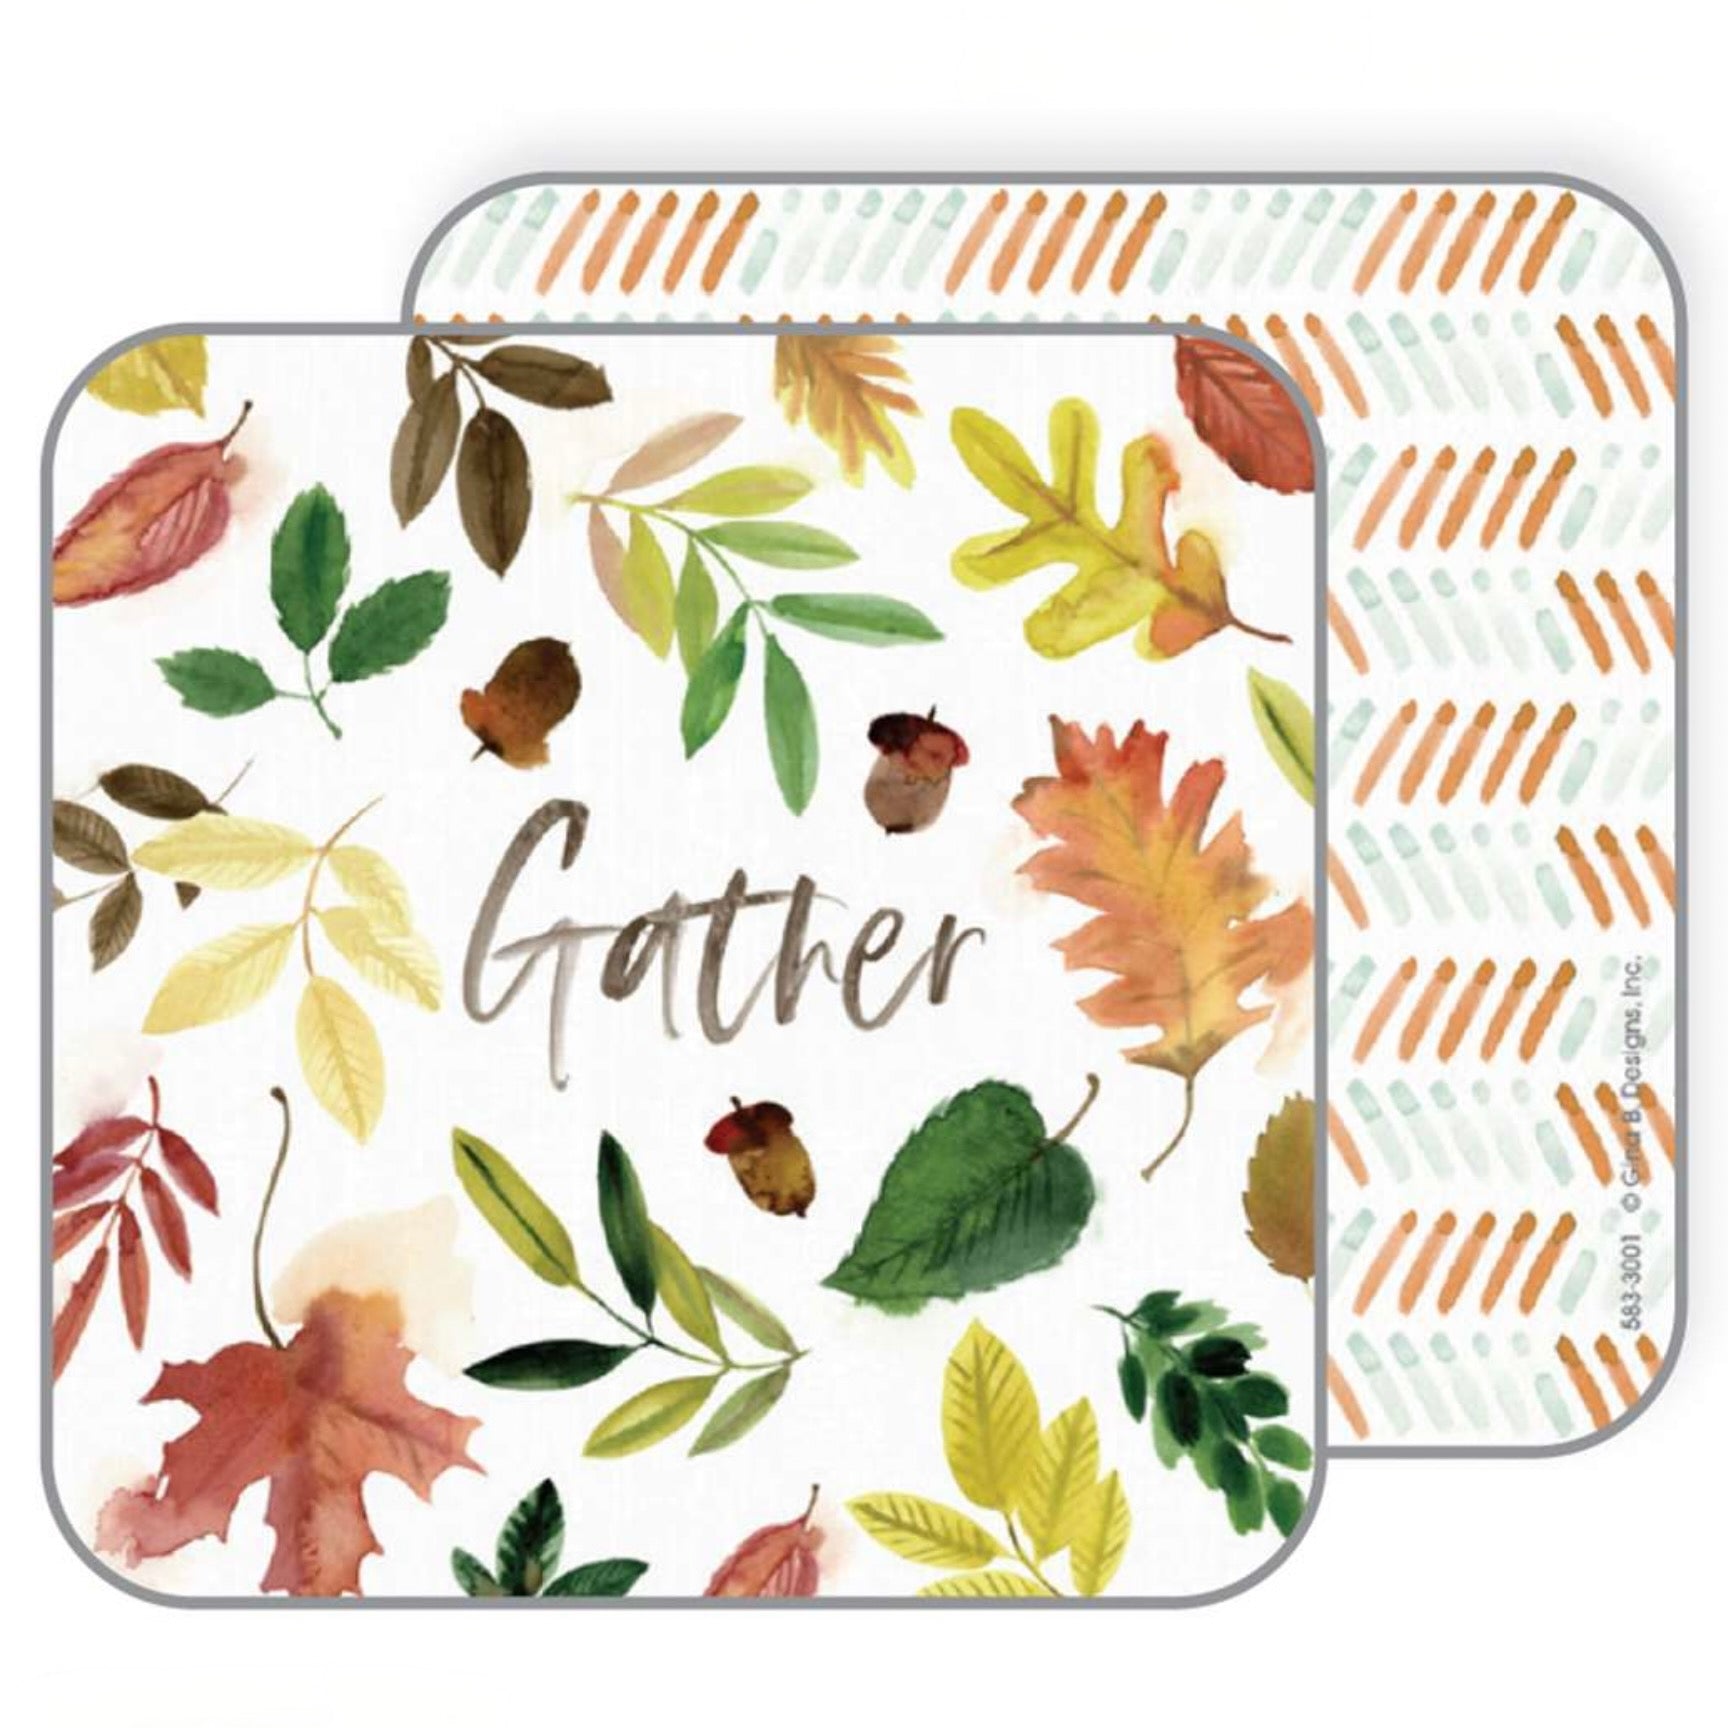 "Gather" Fall Leaves Paper Coasters